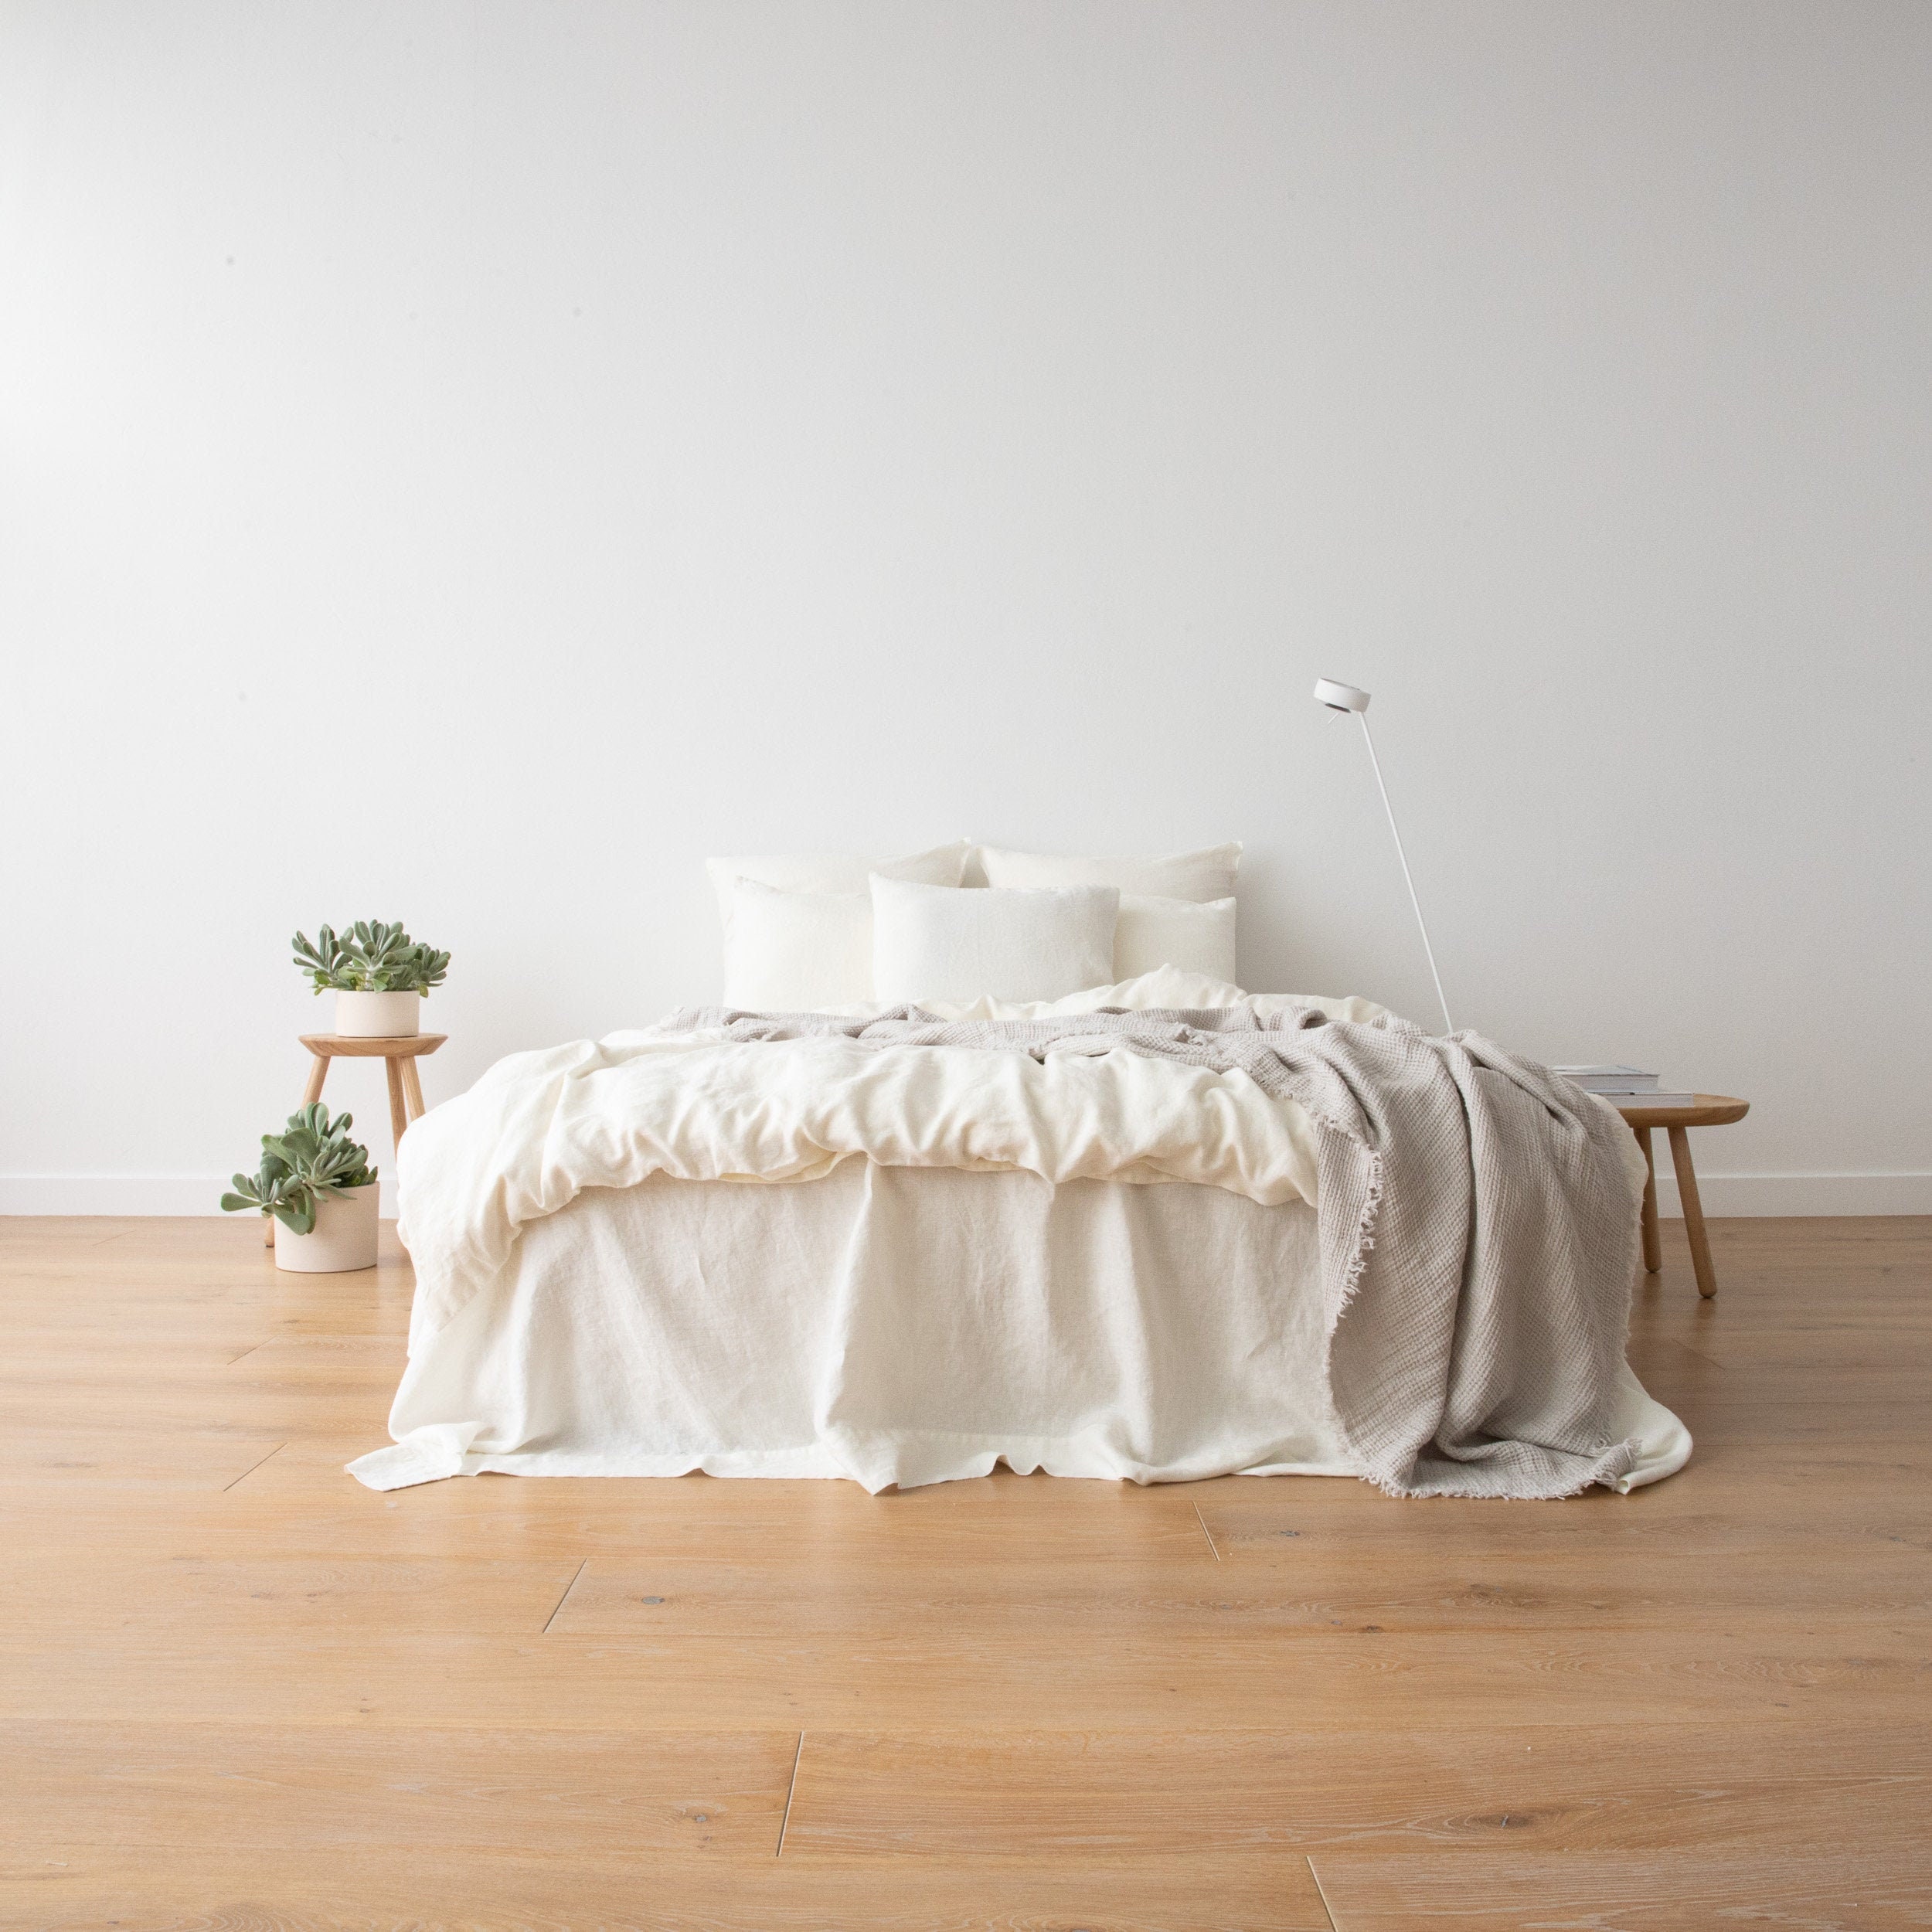 Washed Linen Duvet Cover off White Natural. Cover Etsy